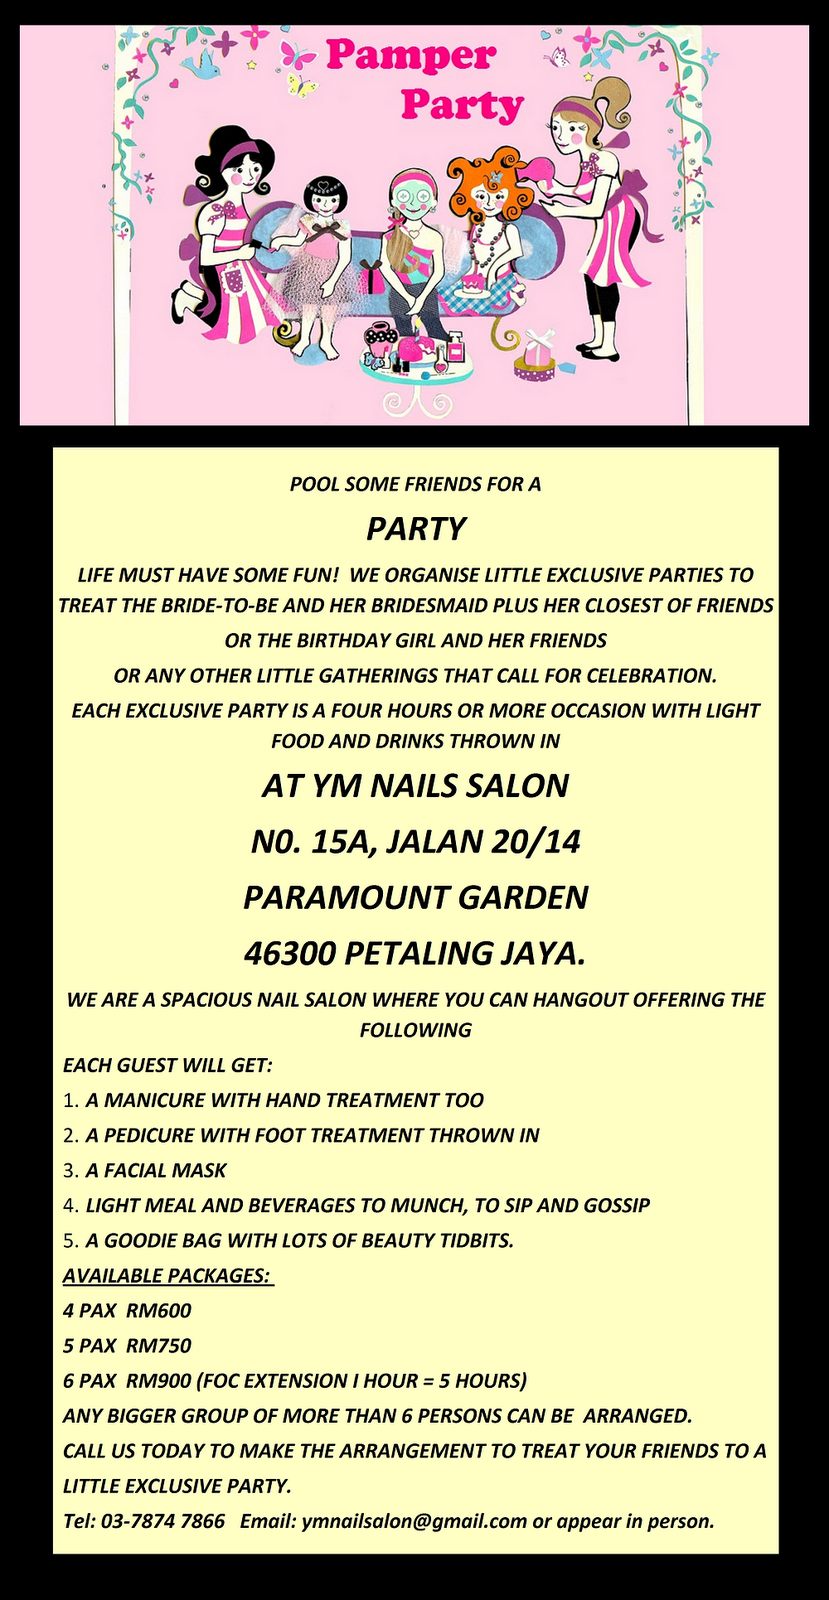 (Image) Pamper Party